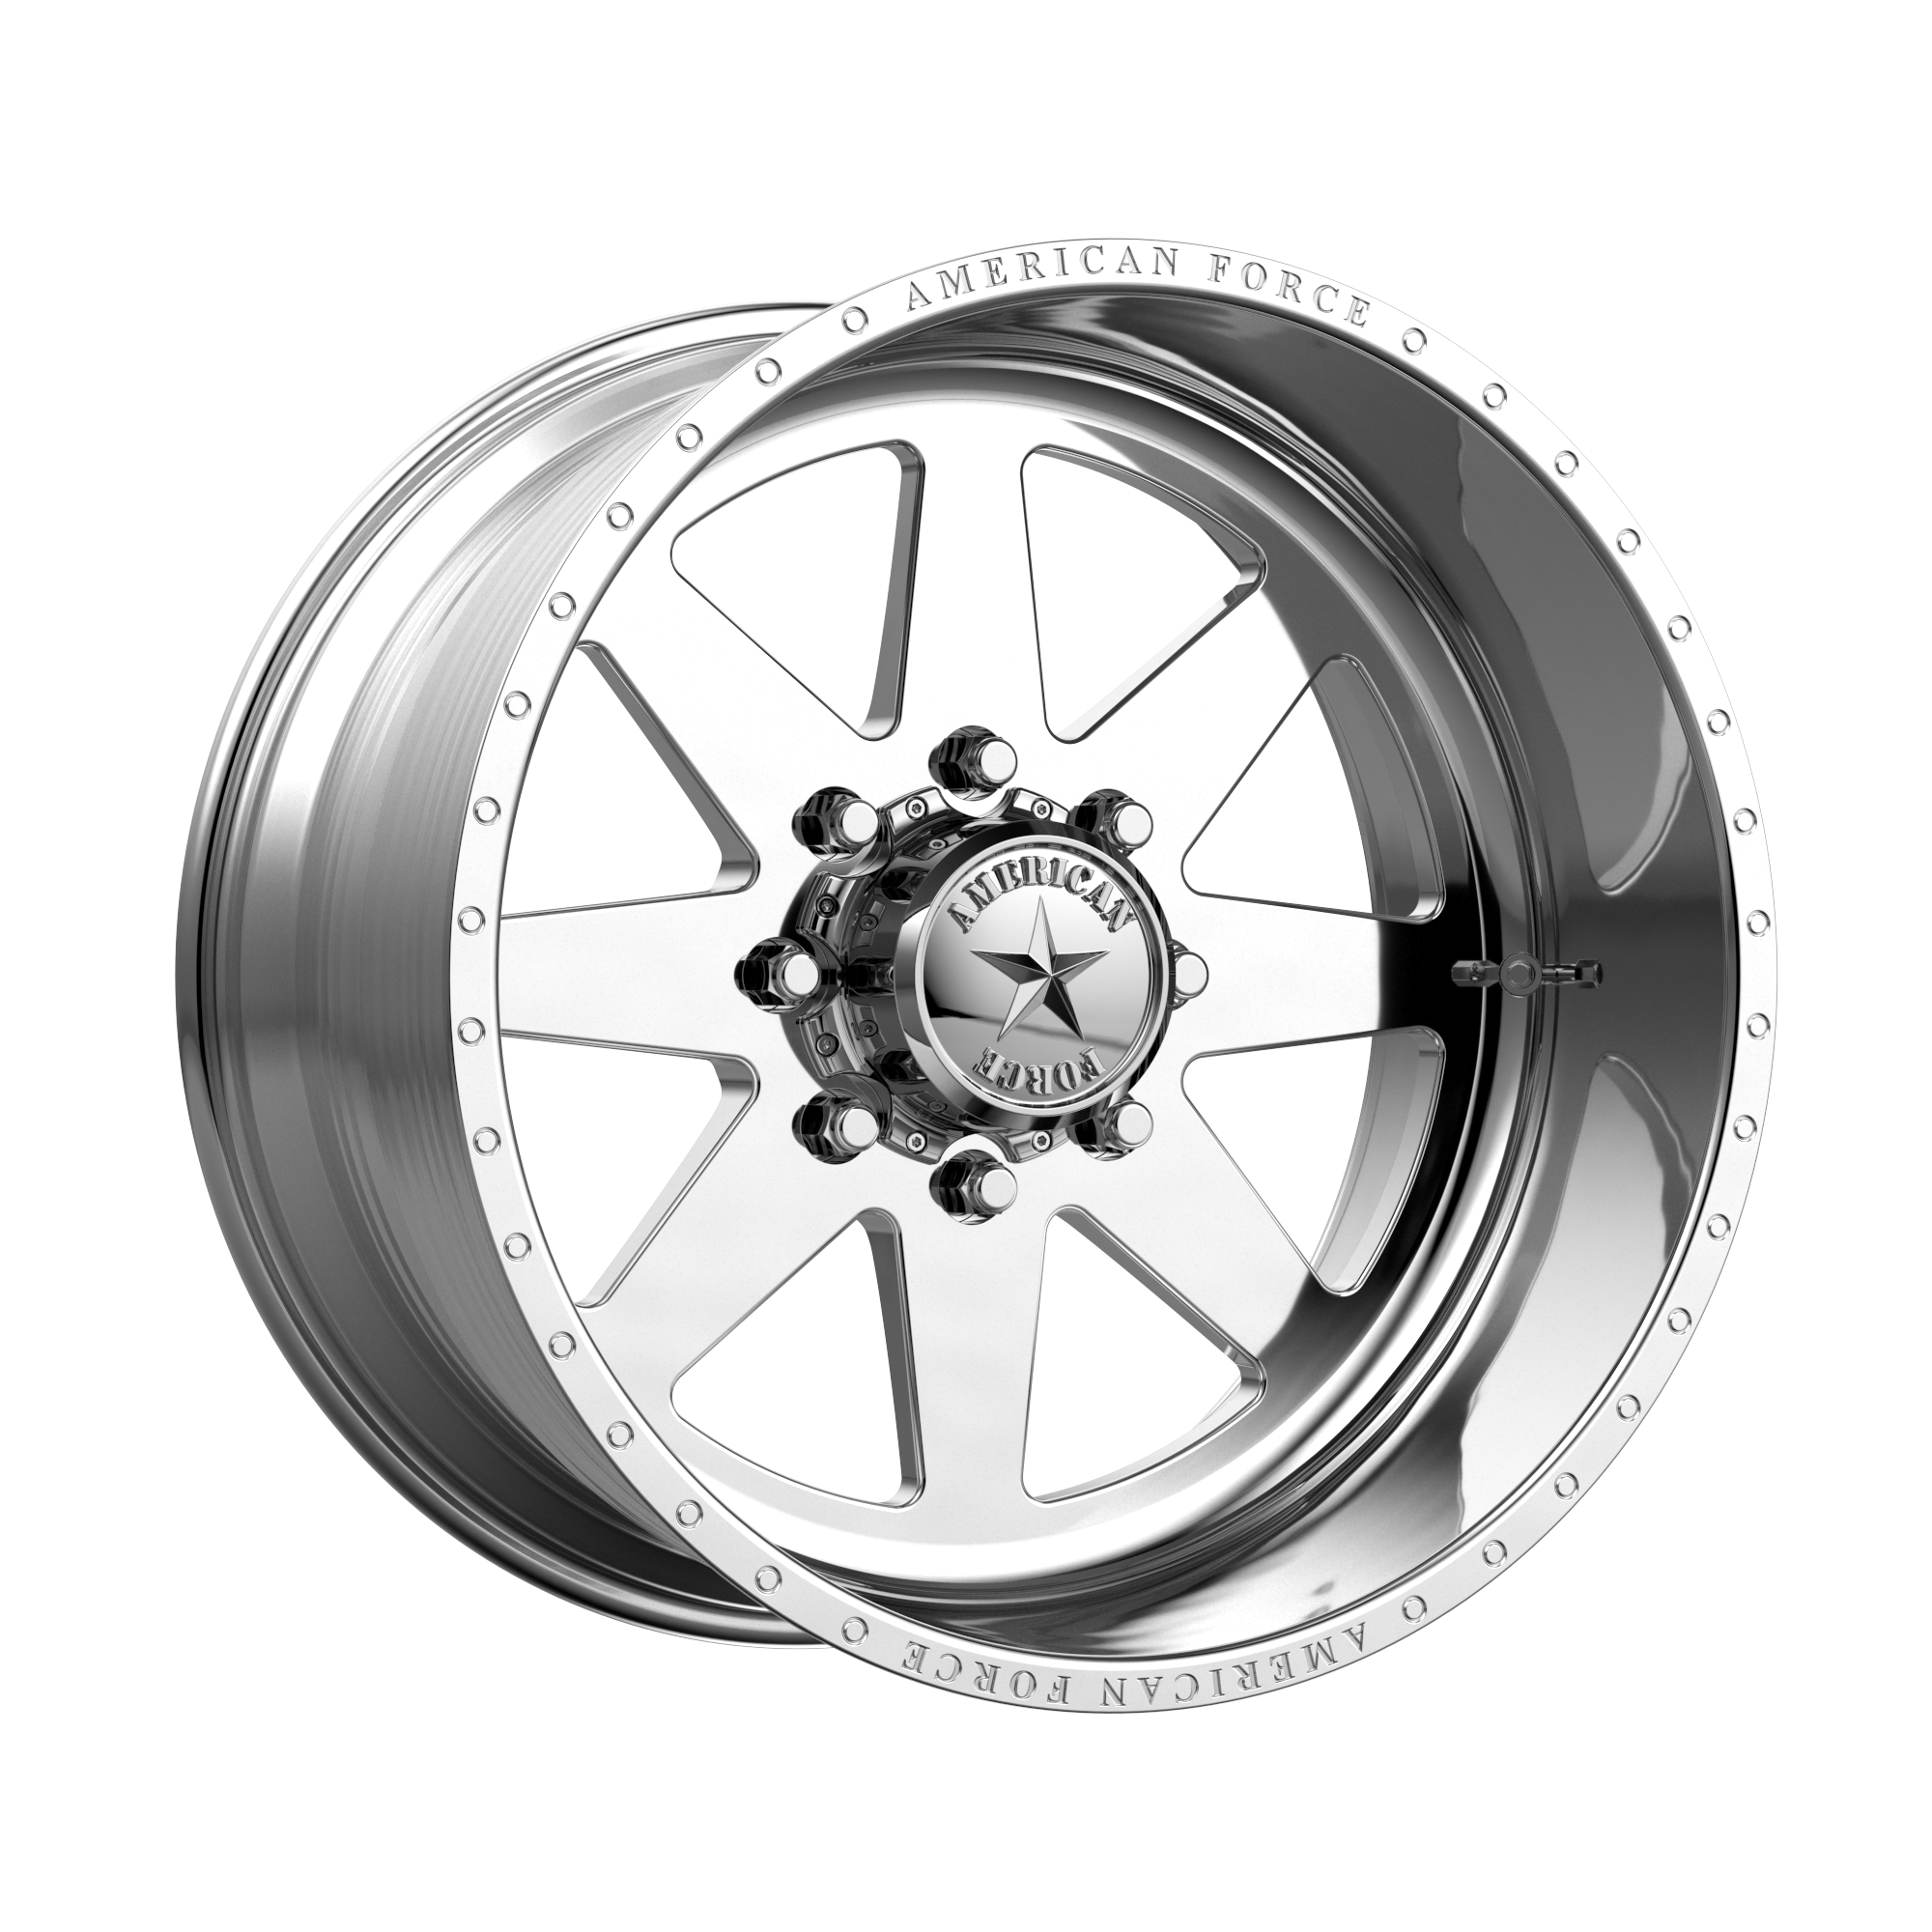 AMERICAN FORCE AFW 11 INDEPENDENCE SS POLISHED WHEELS | 26X16 | 8X180 | OFFSET: -101MM | CB: 124.2MM